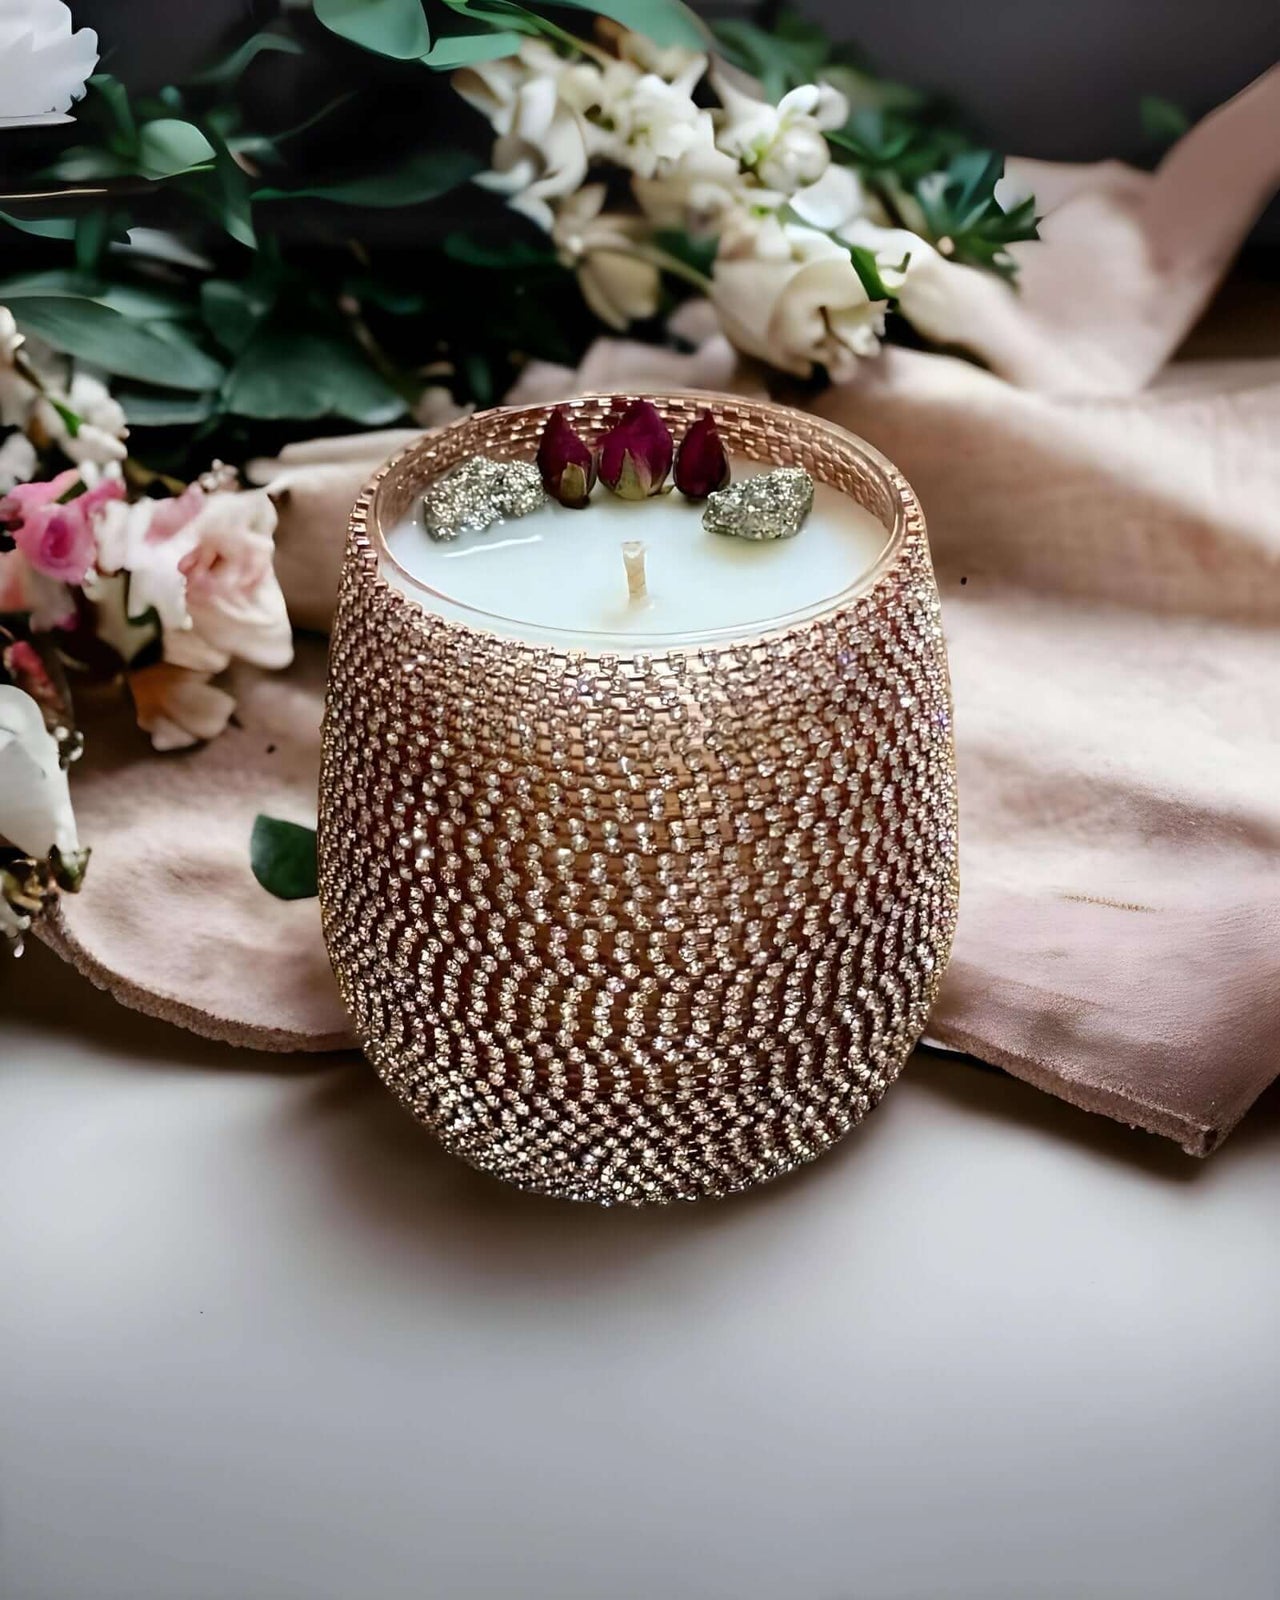 Luxury Bling Candle - Pyrite Sparkle Add glamour with the Beautiful Bling Candle, infused with Pyrite